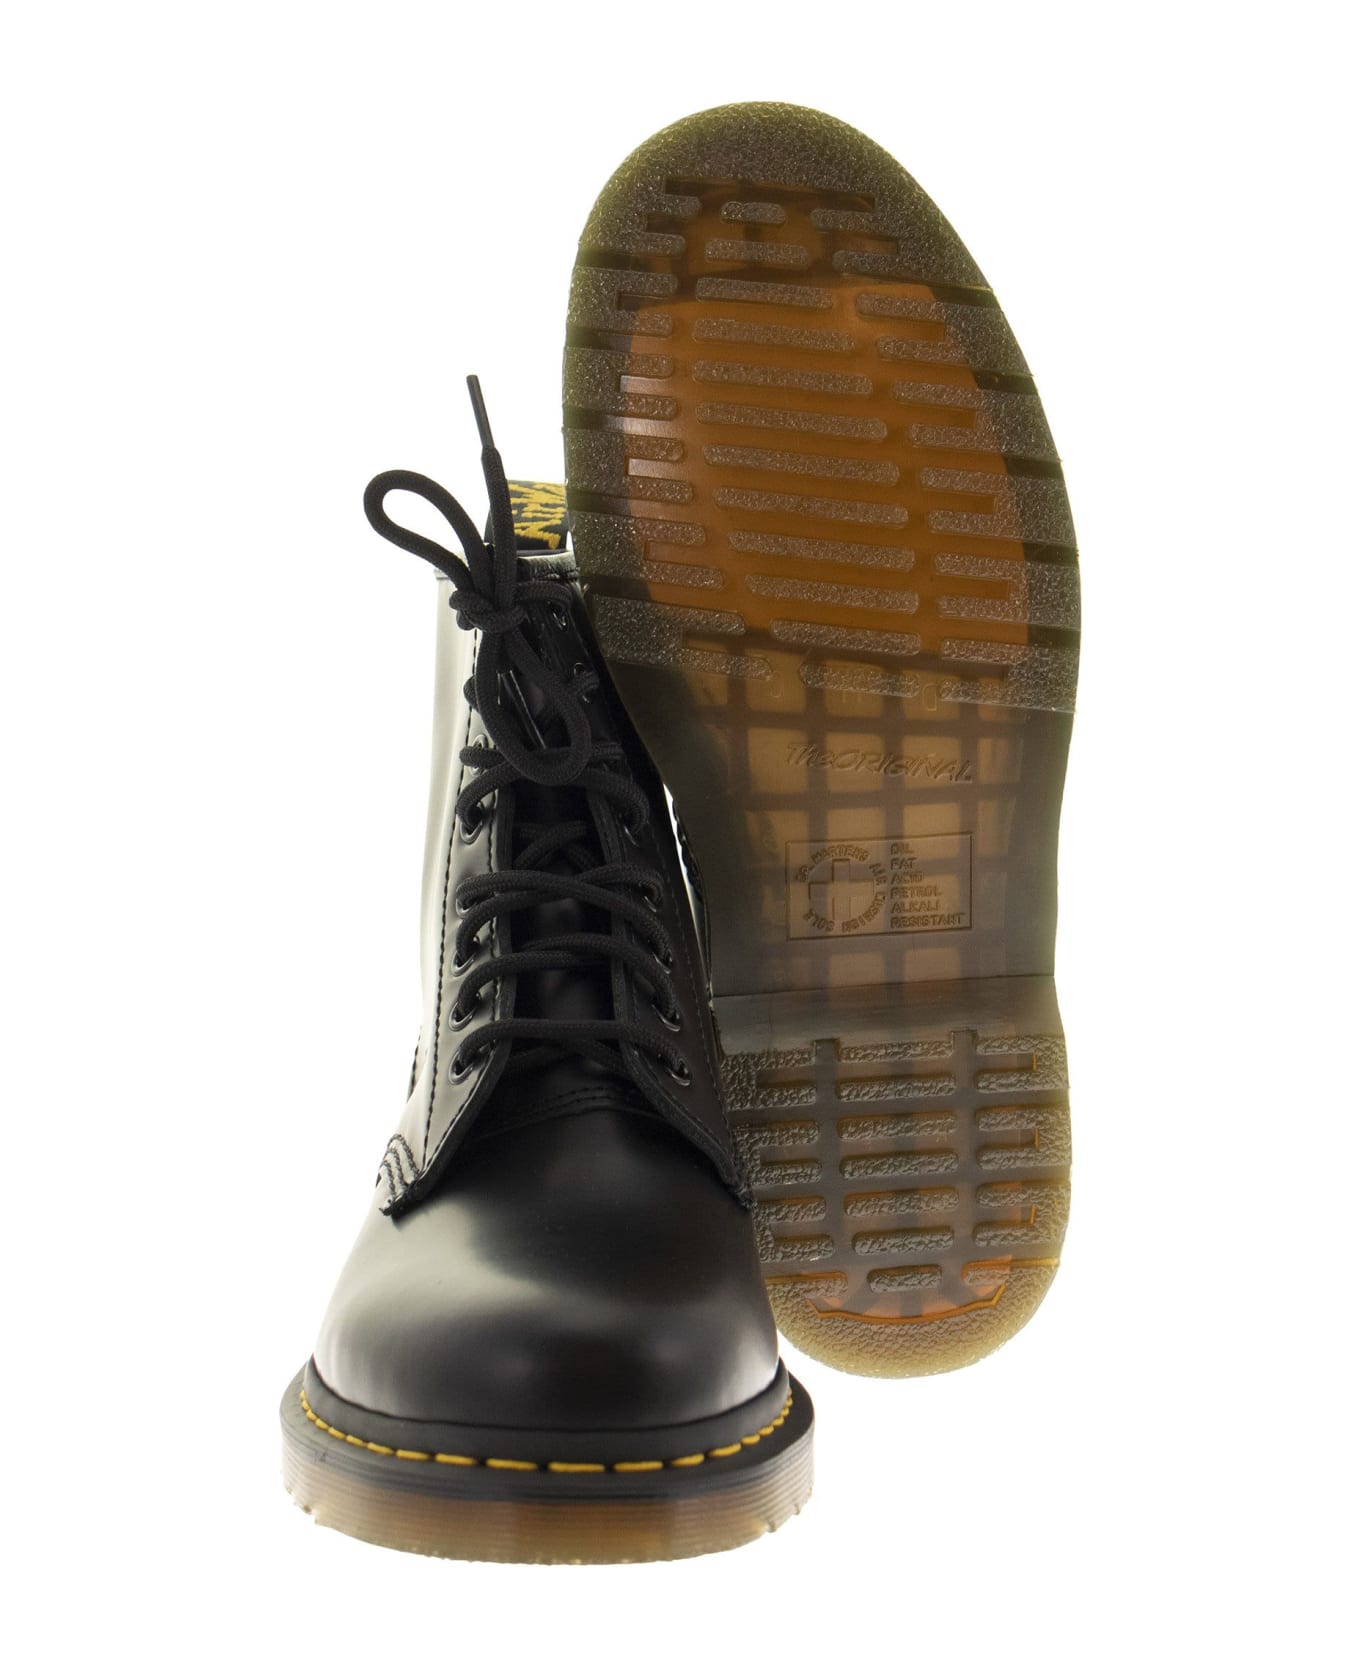 Dr. Martens 1460 Smooth Leather Combat Boots - Black